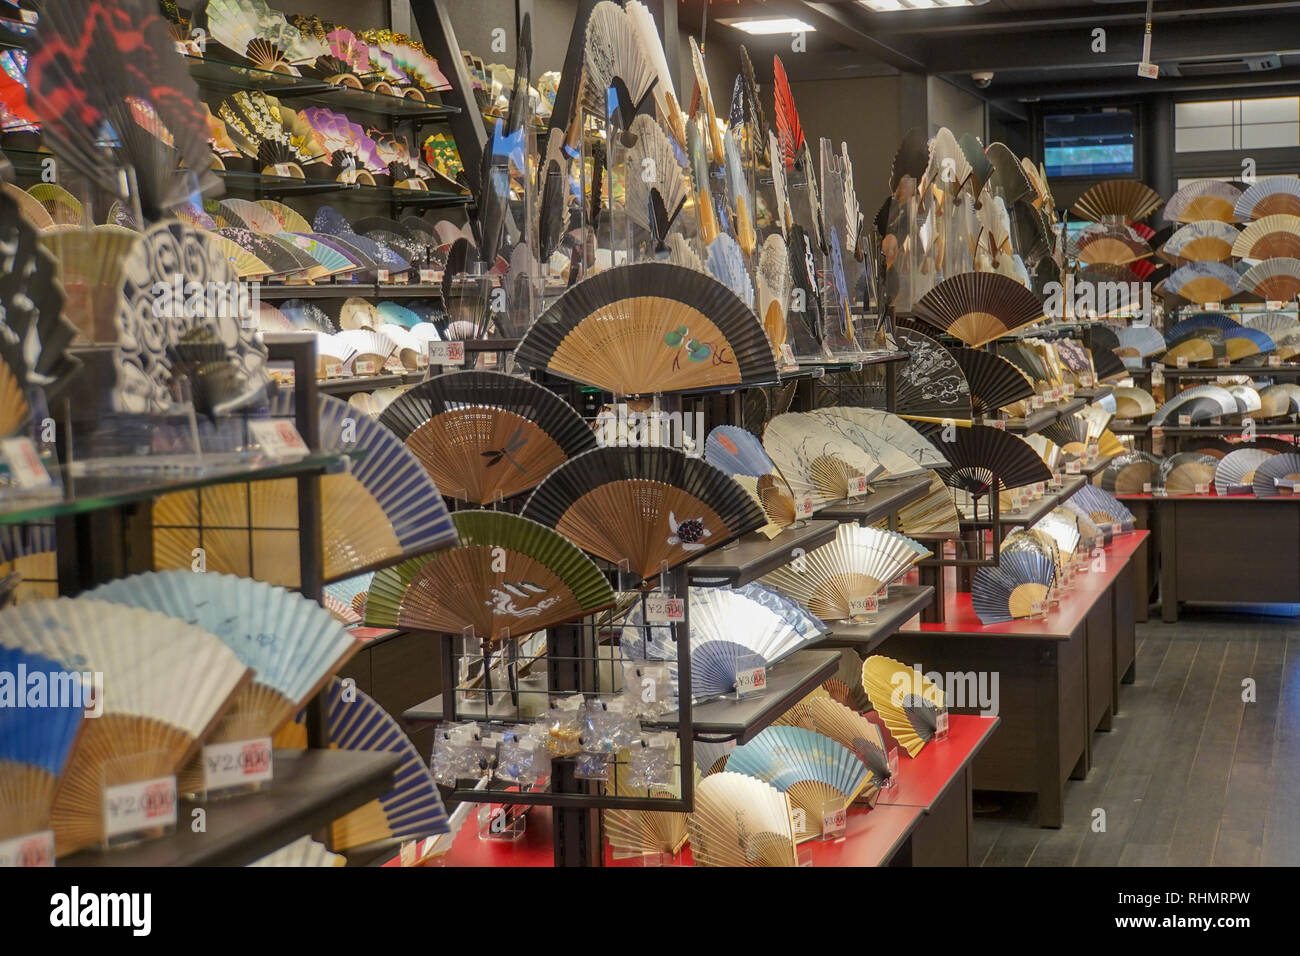 Japanese rice paper Fans on display in a Fan Shop. Photographed in Japan, Kyoto, Stock Photo